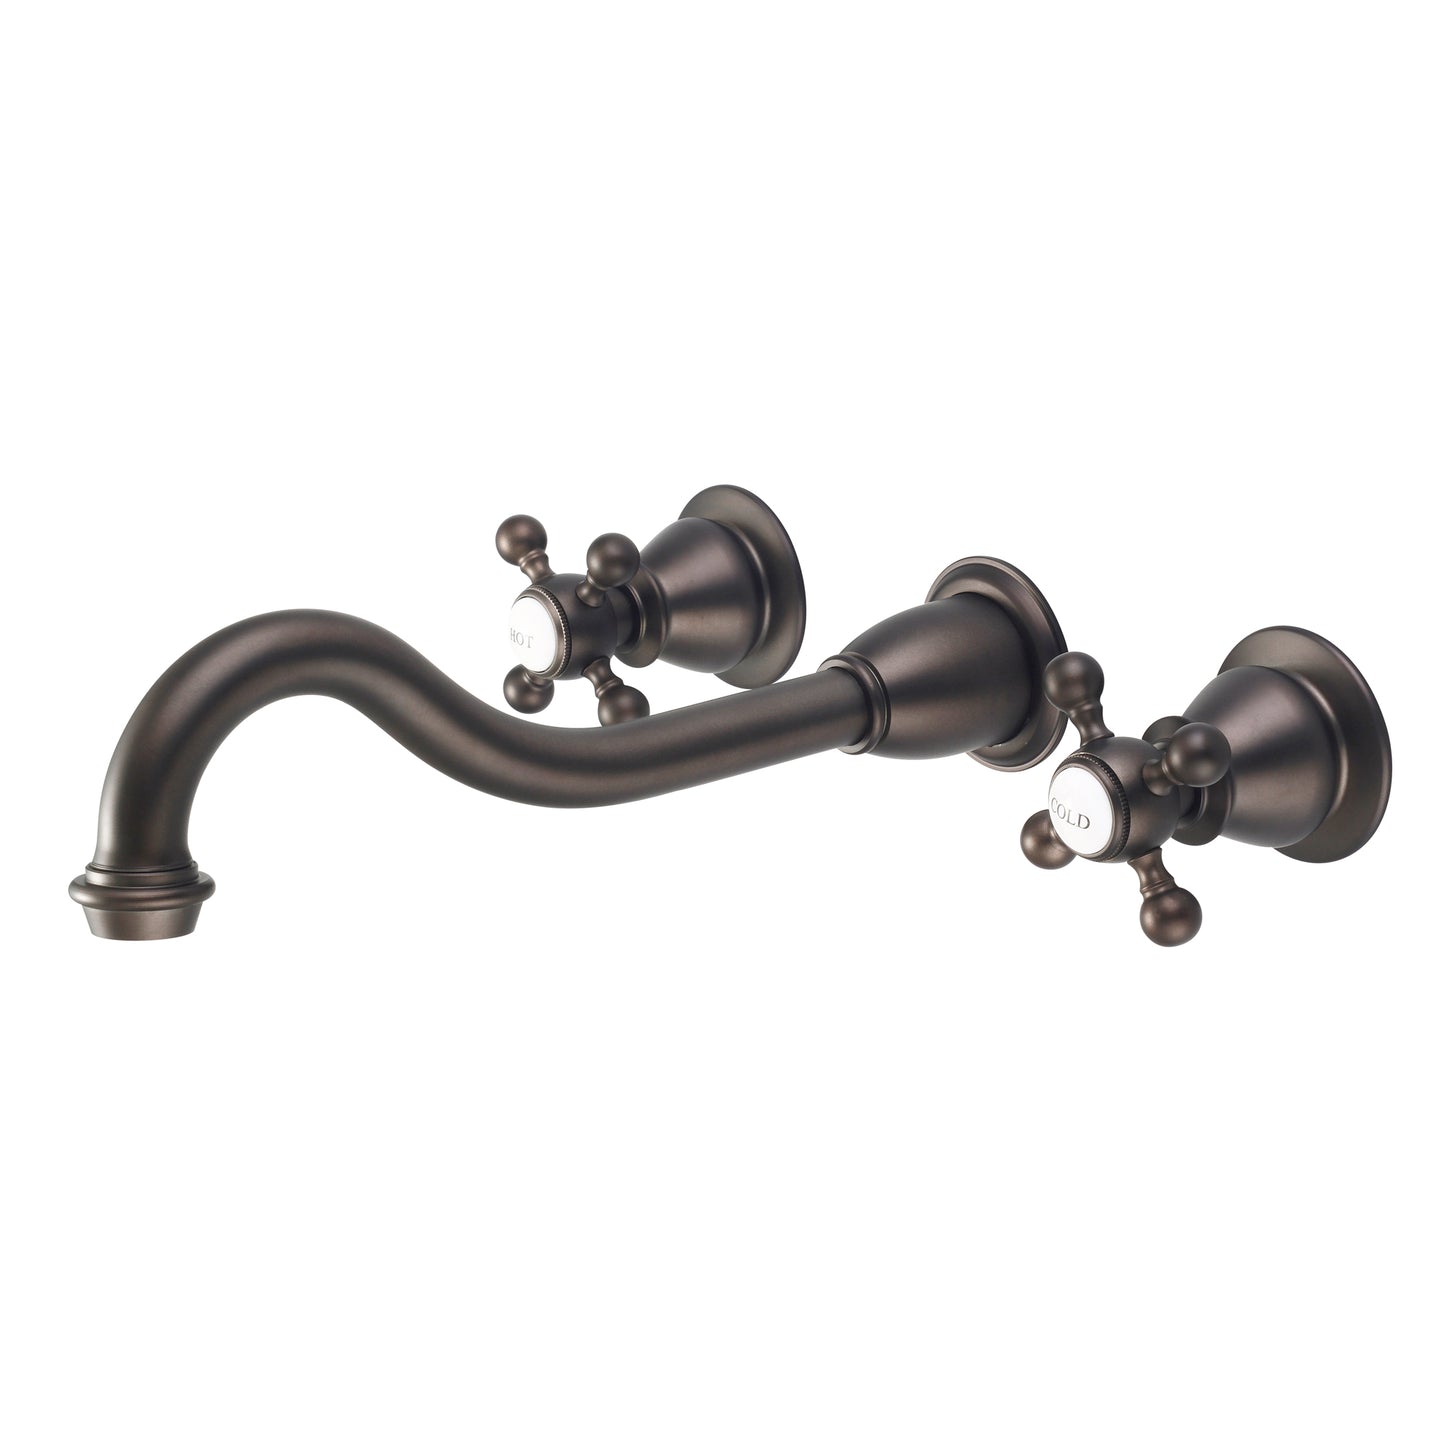 Elegant Spout Wall Mount Vessel/Bathroom Faucets in Oil Rubbed Bronze Finish, With Metal Lever Handles, Hot And Cold Labels Included